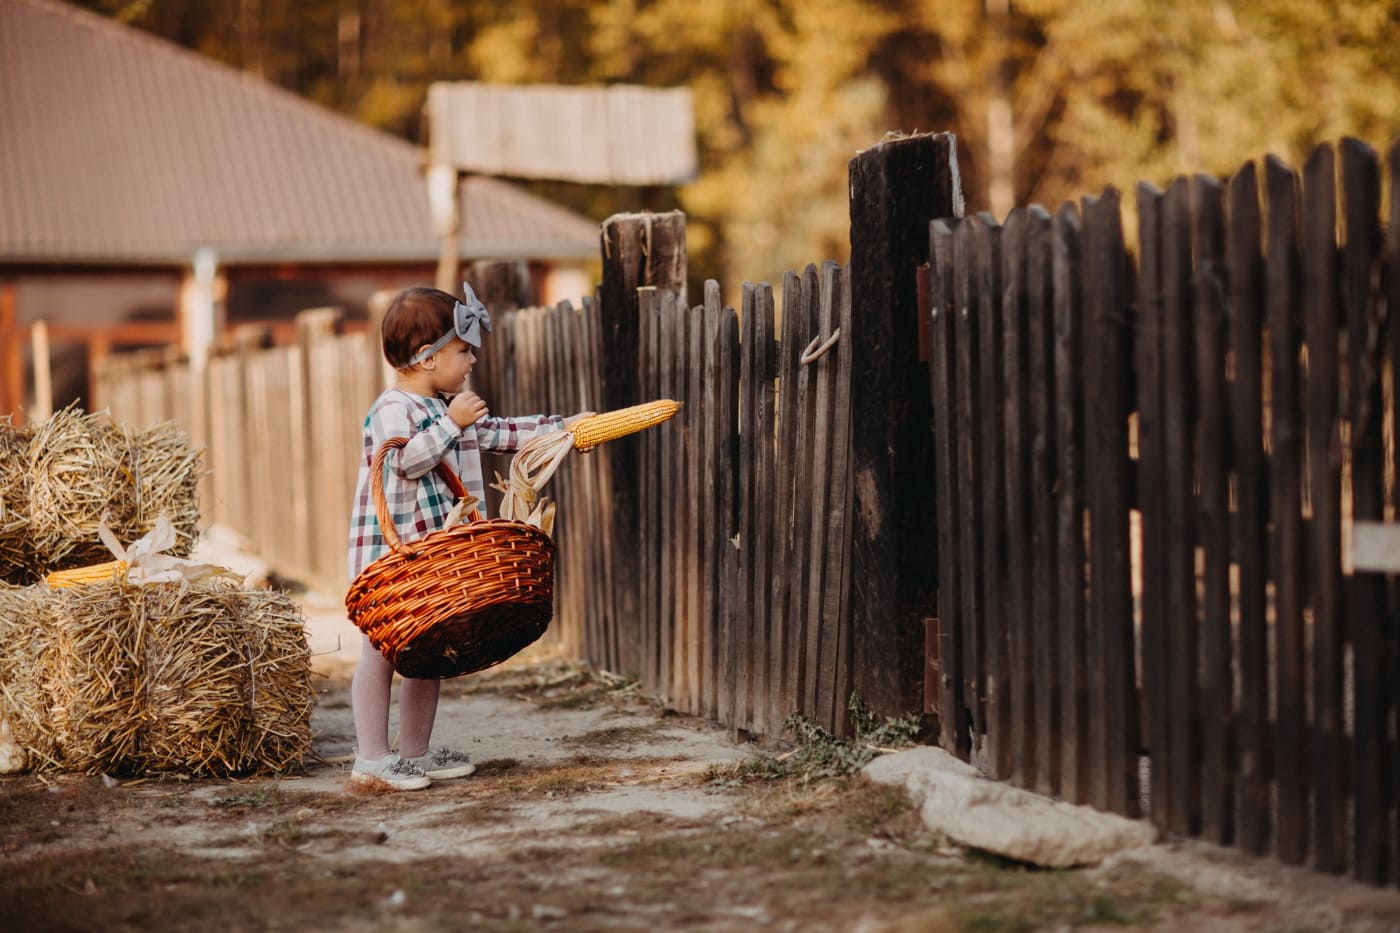 adorable, child, countryside, village, picket fence, wicker basket, people, fence, wood, outdoors